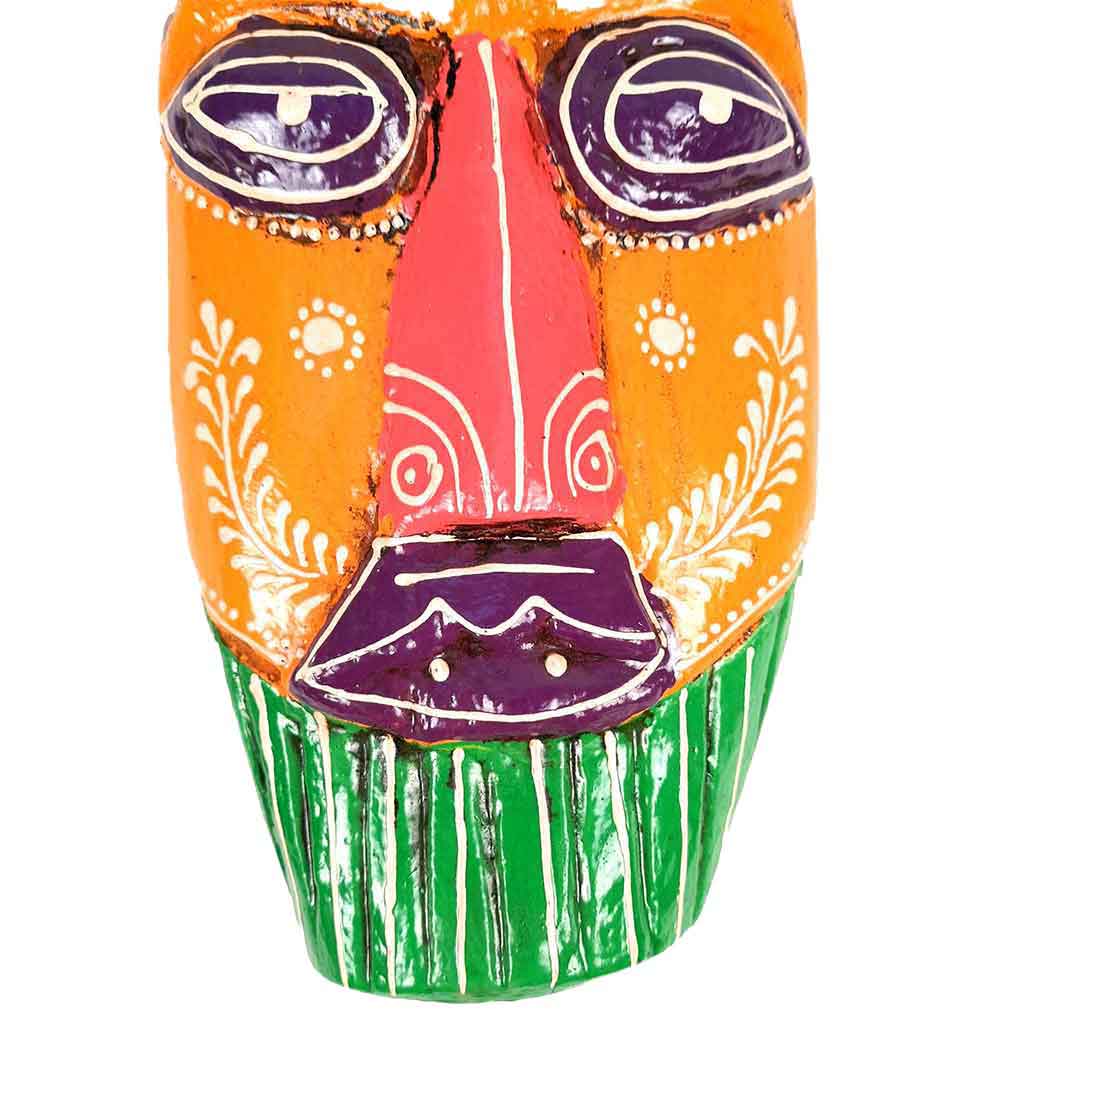 Ethnic Wall Masks | Wooden Mask Wall Hanging - for Living Room & Home Decor - 12 Inch #color_yellow